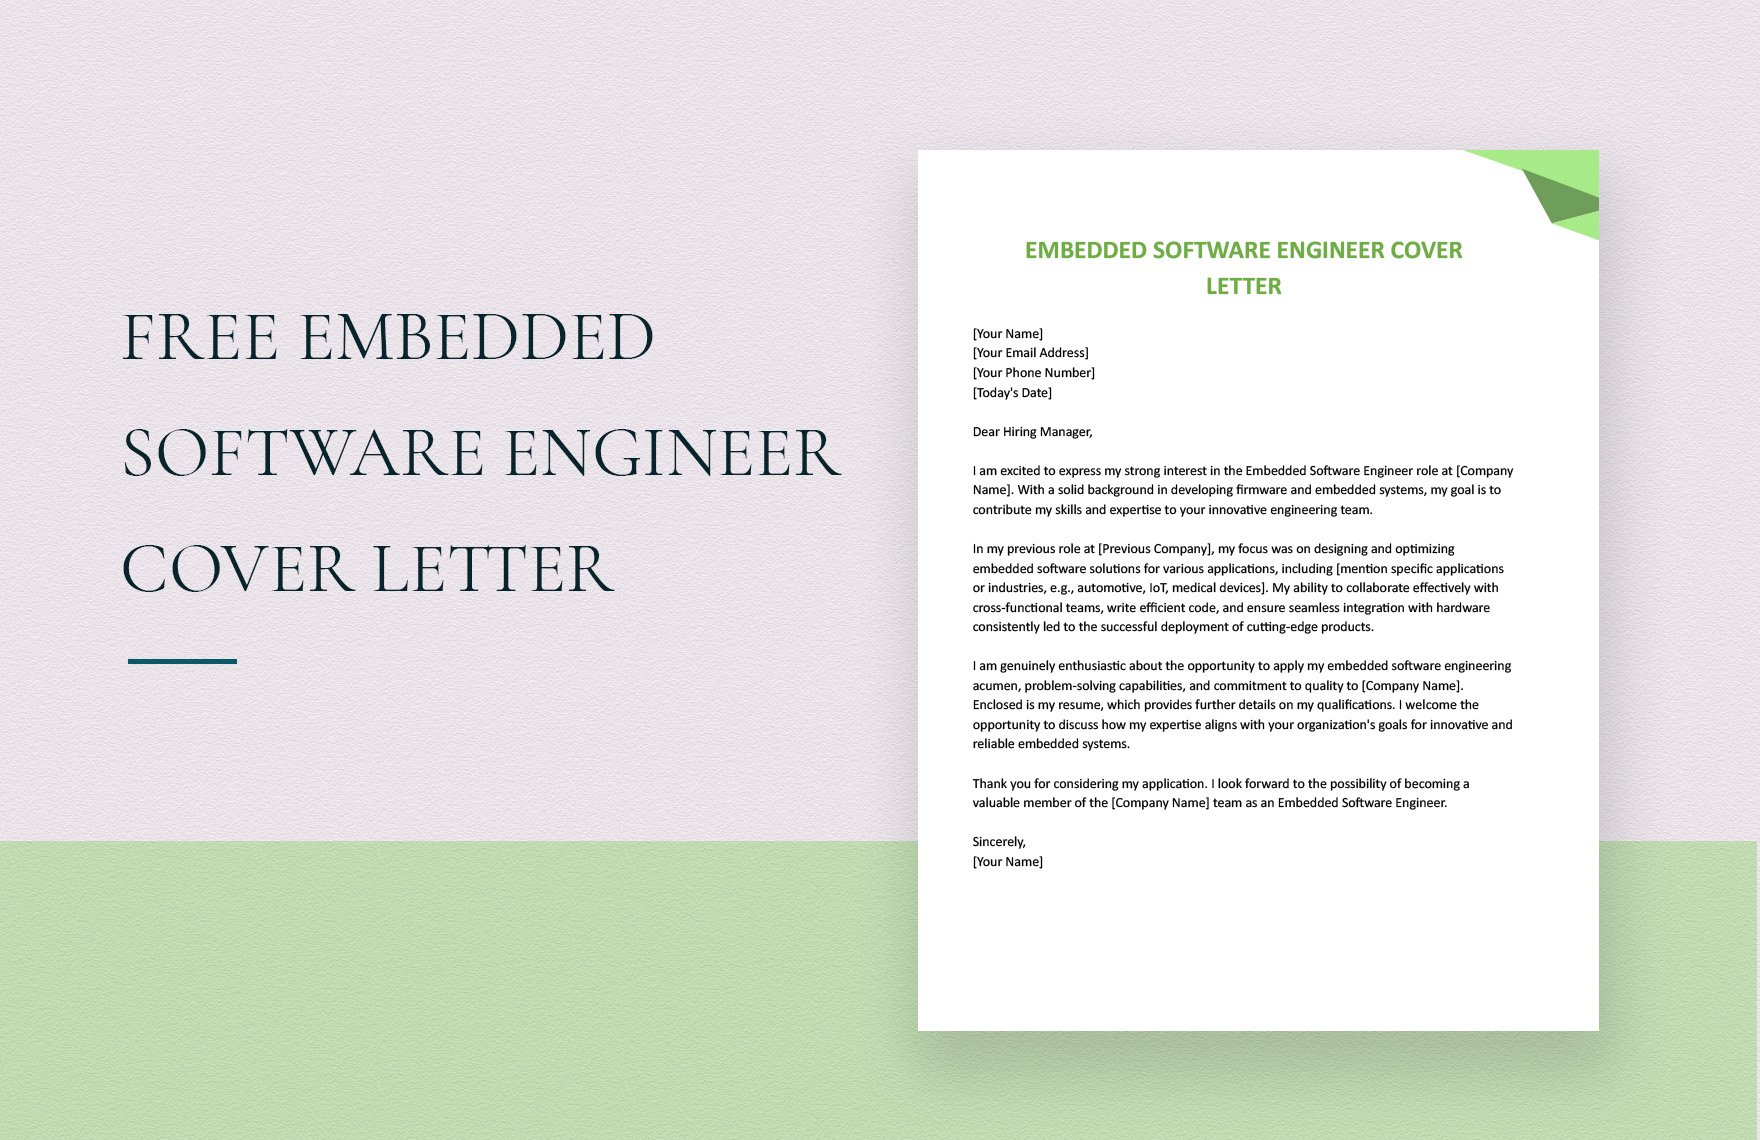 Embedded Software Engineer Cover Letter